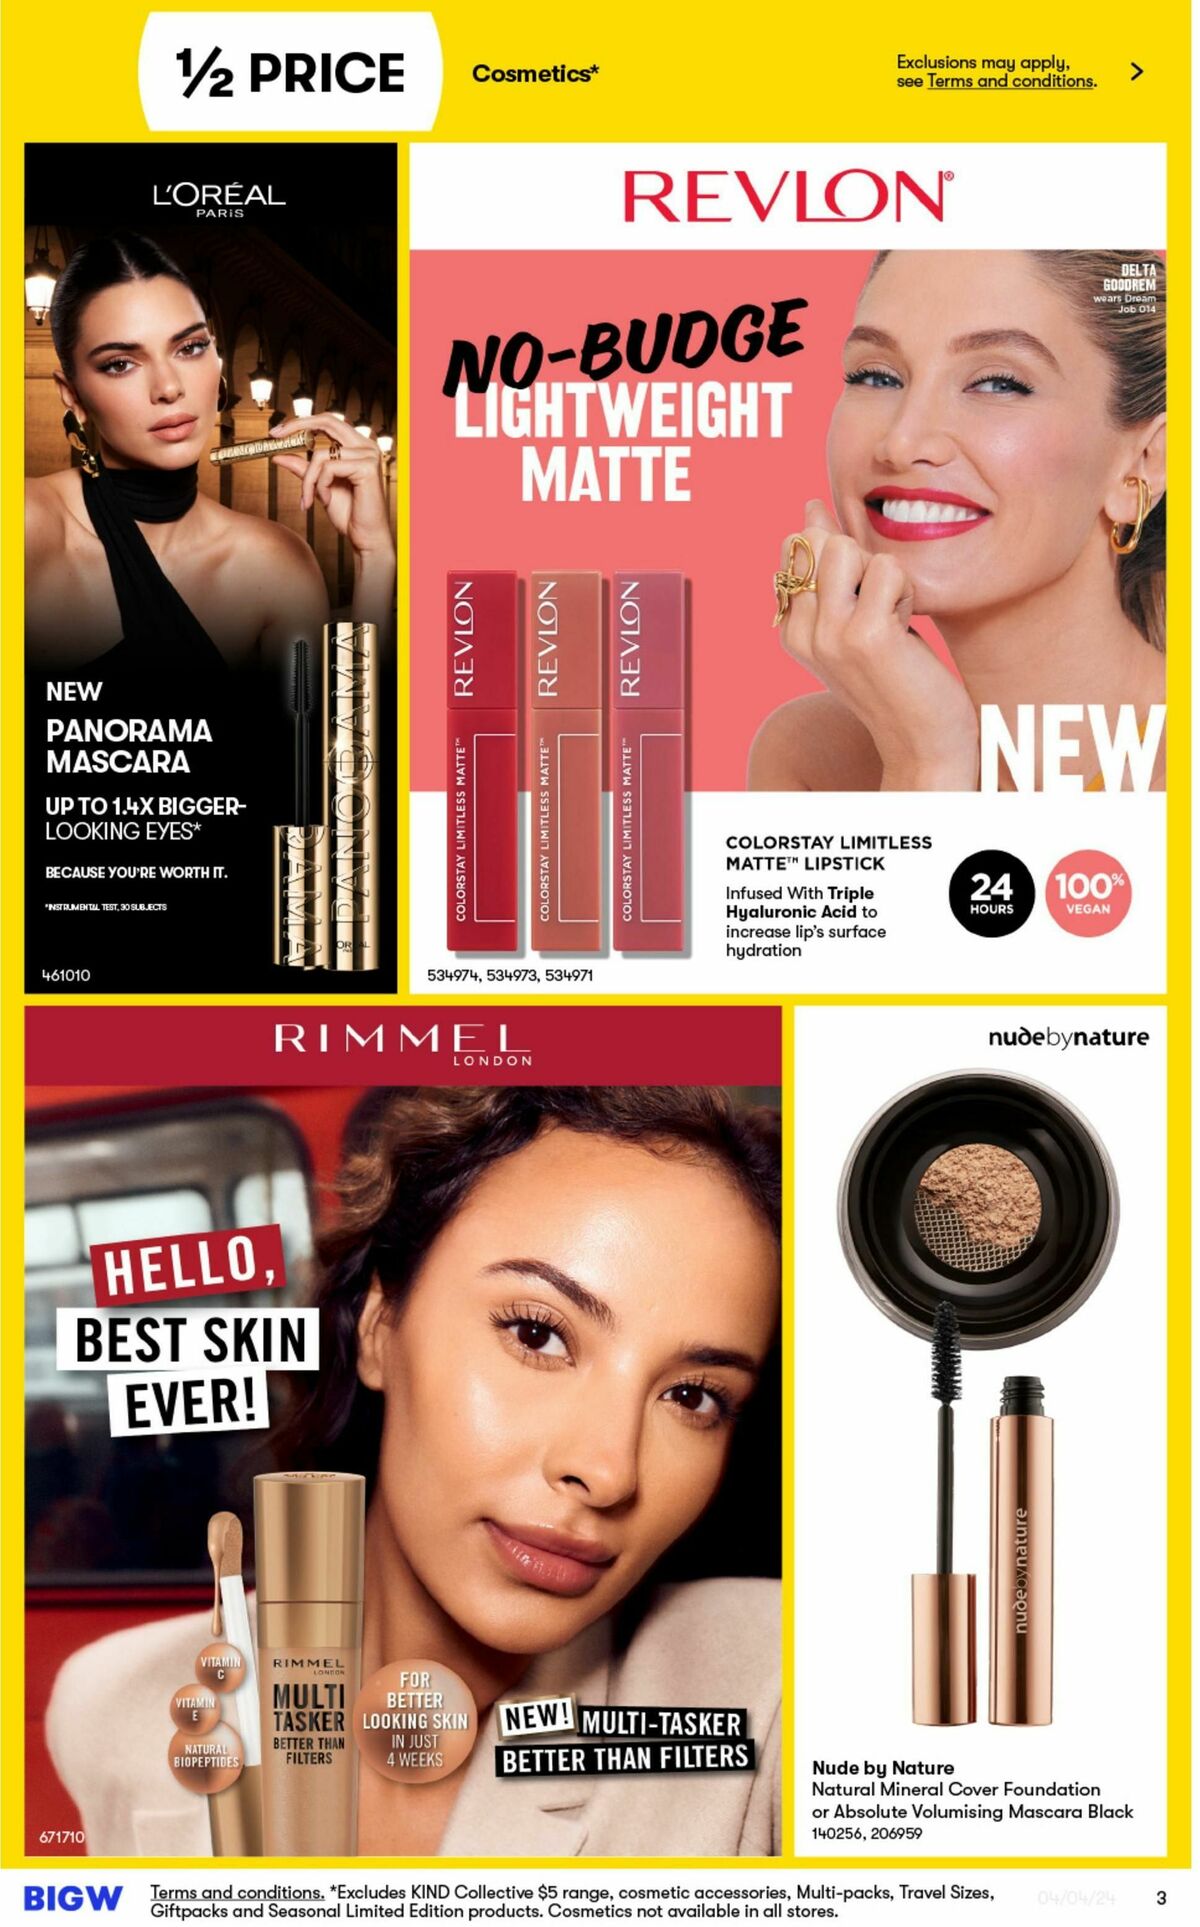 Big W More Beauty For Less Catalogues from 4 April